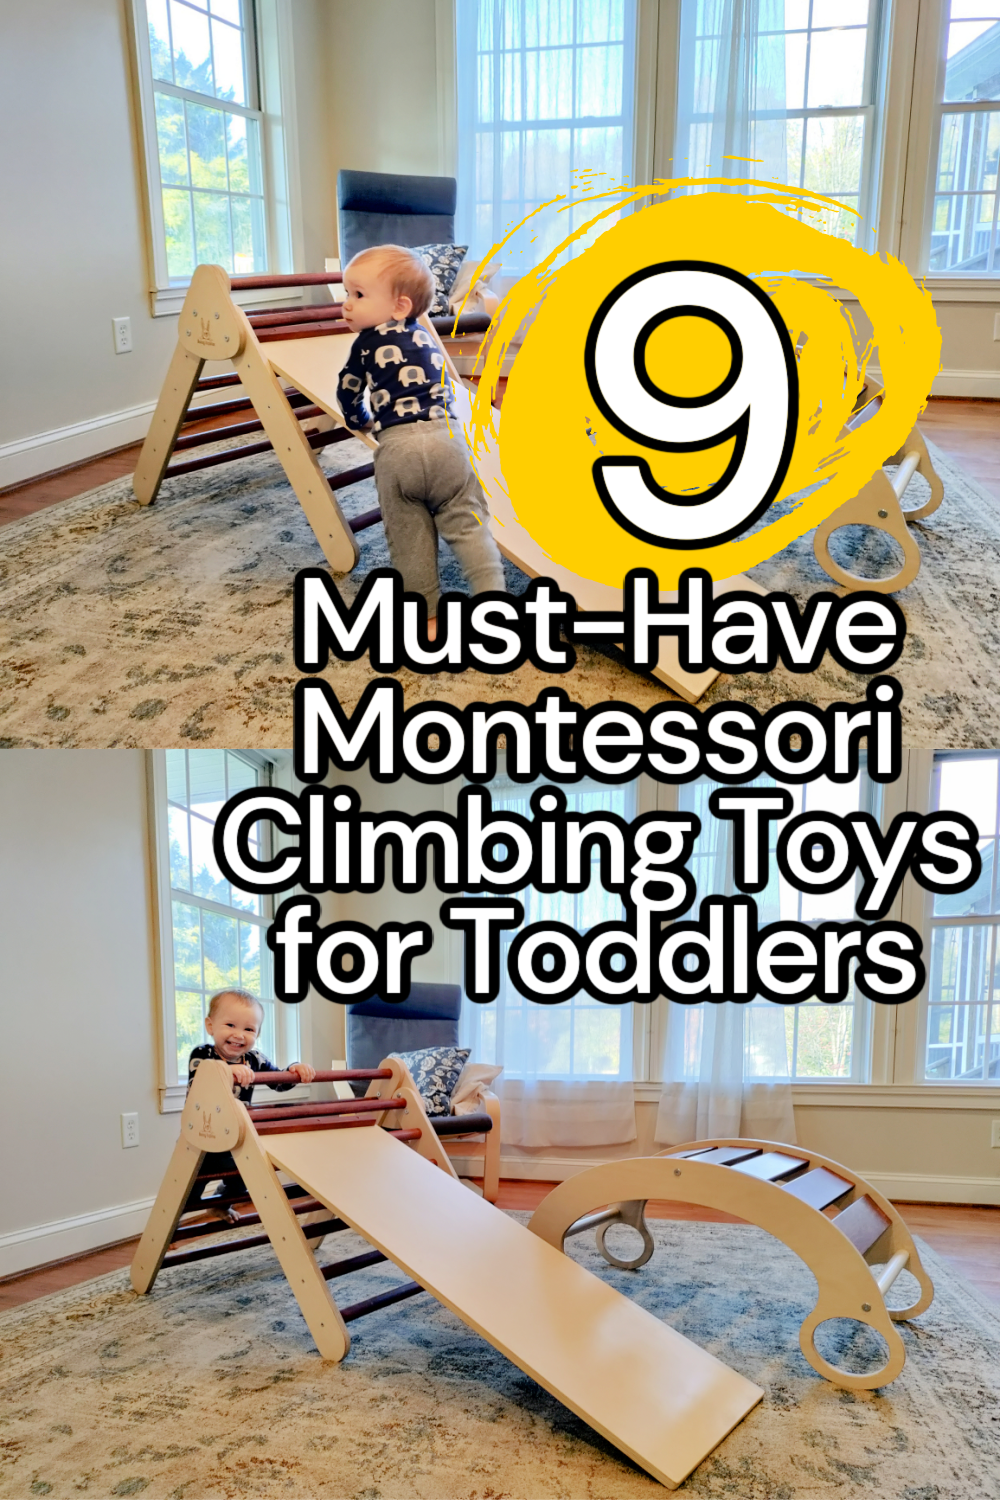 Montessori Climbing Toys For Toddlers